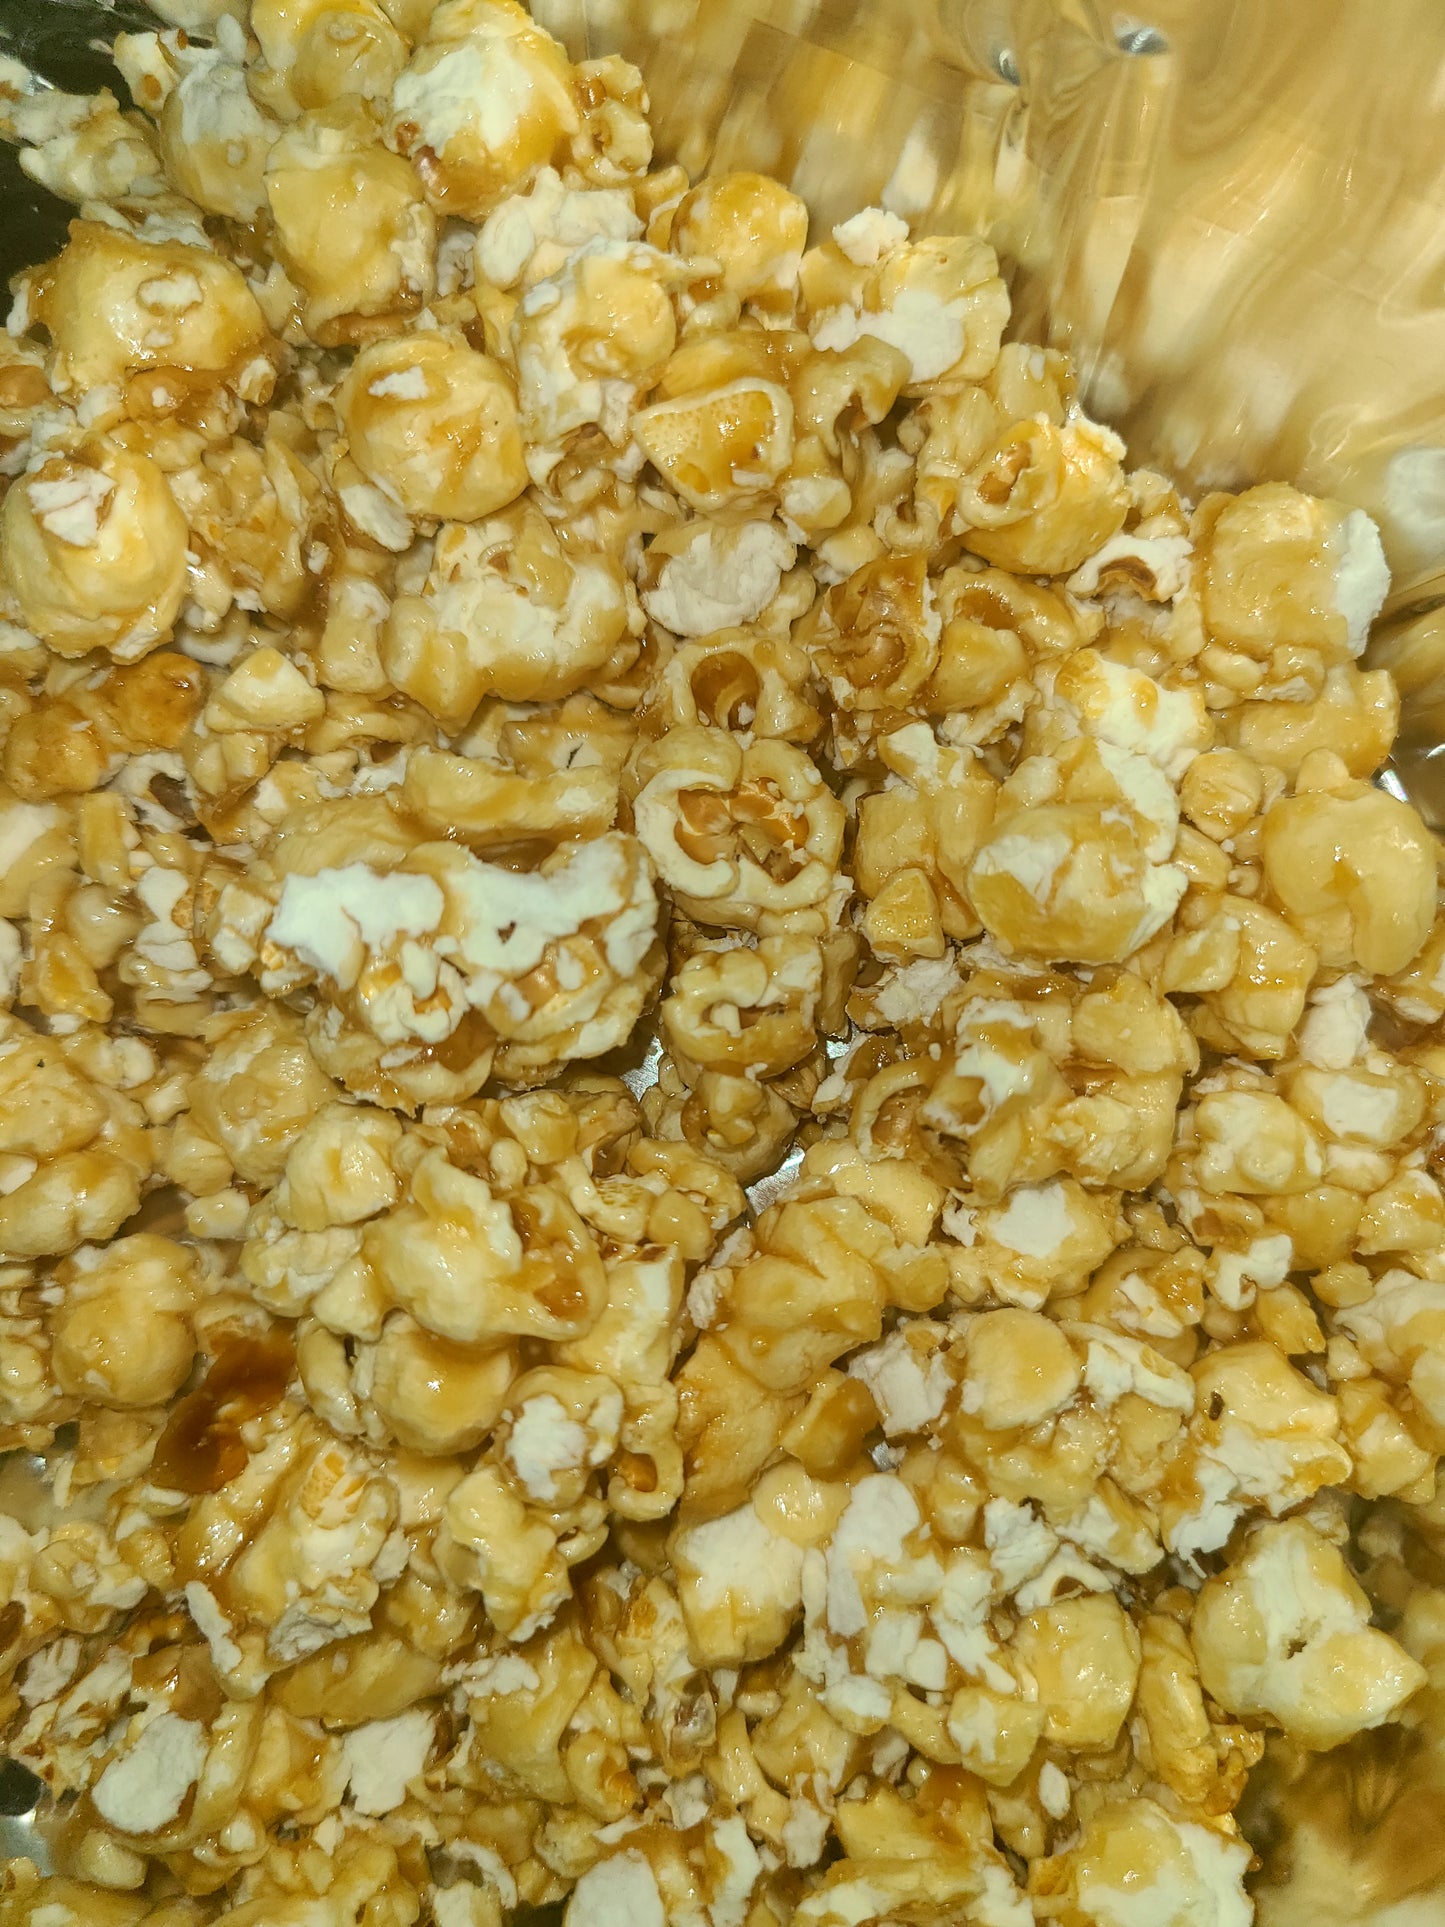 How to make Gourmet Popcorn Tutorial (pre-recorded)